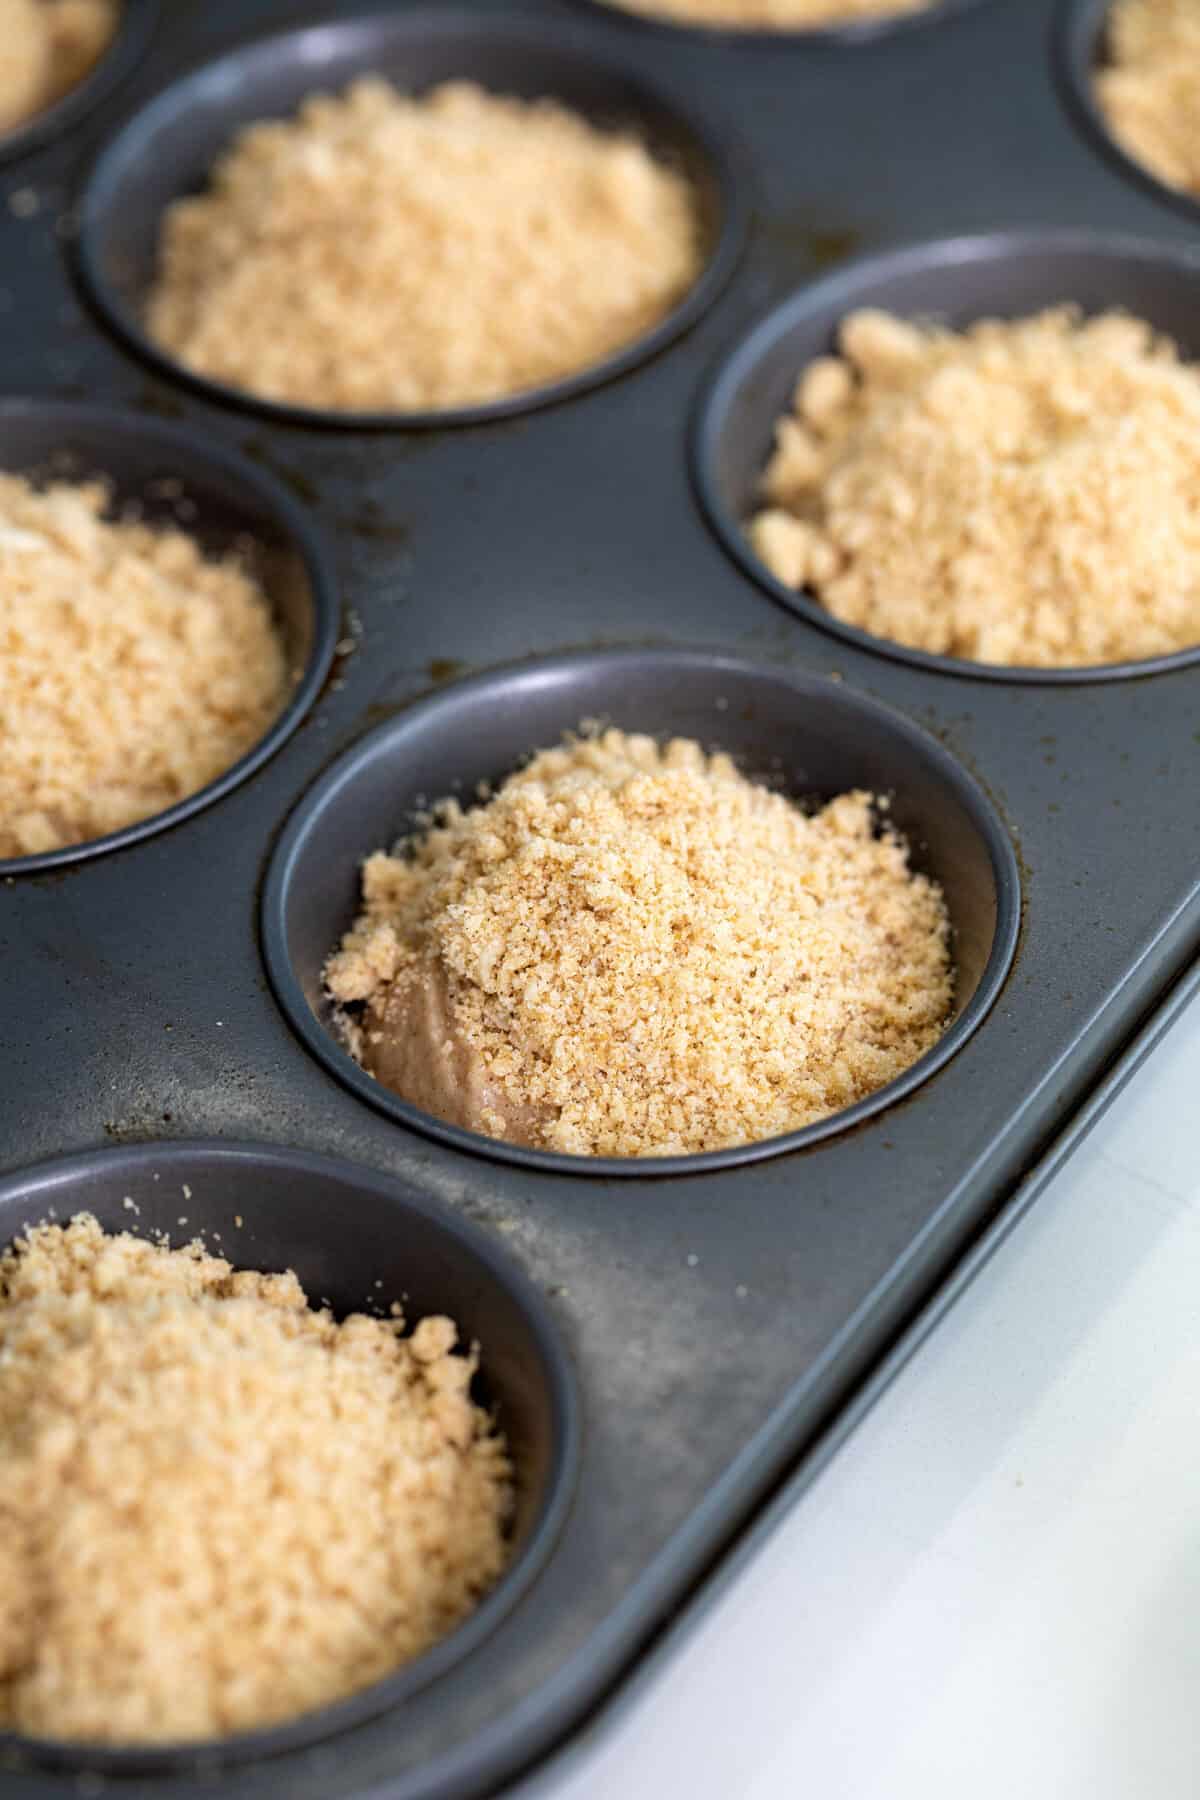 Cinnamon muffins with strusel on top unbaked